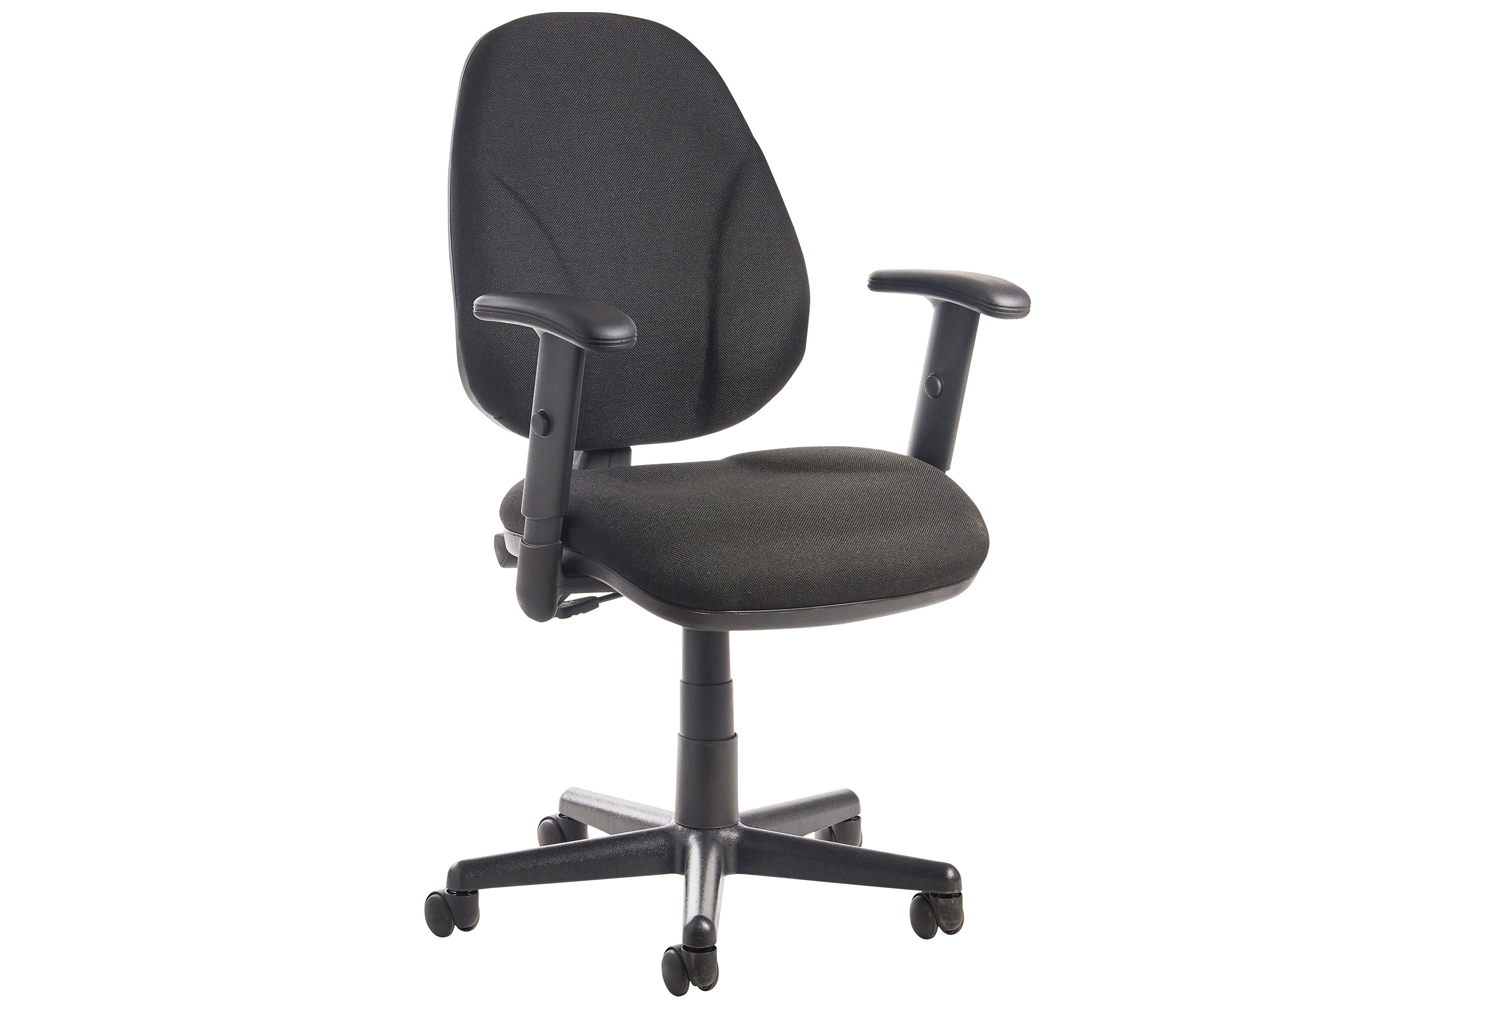 Full Lumbar 1 Lever Operator Office Chair With Adjustable Arms, Black, Fully Installed